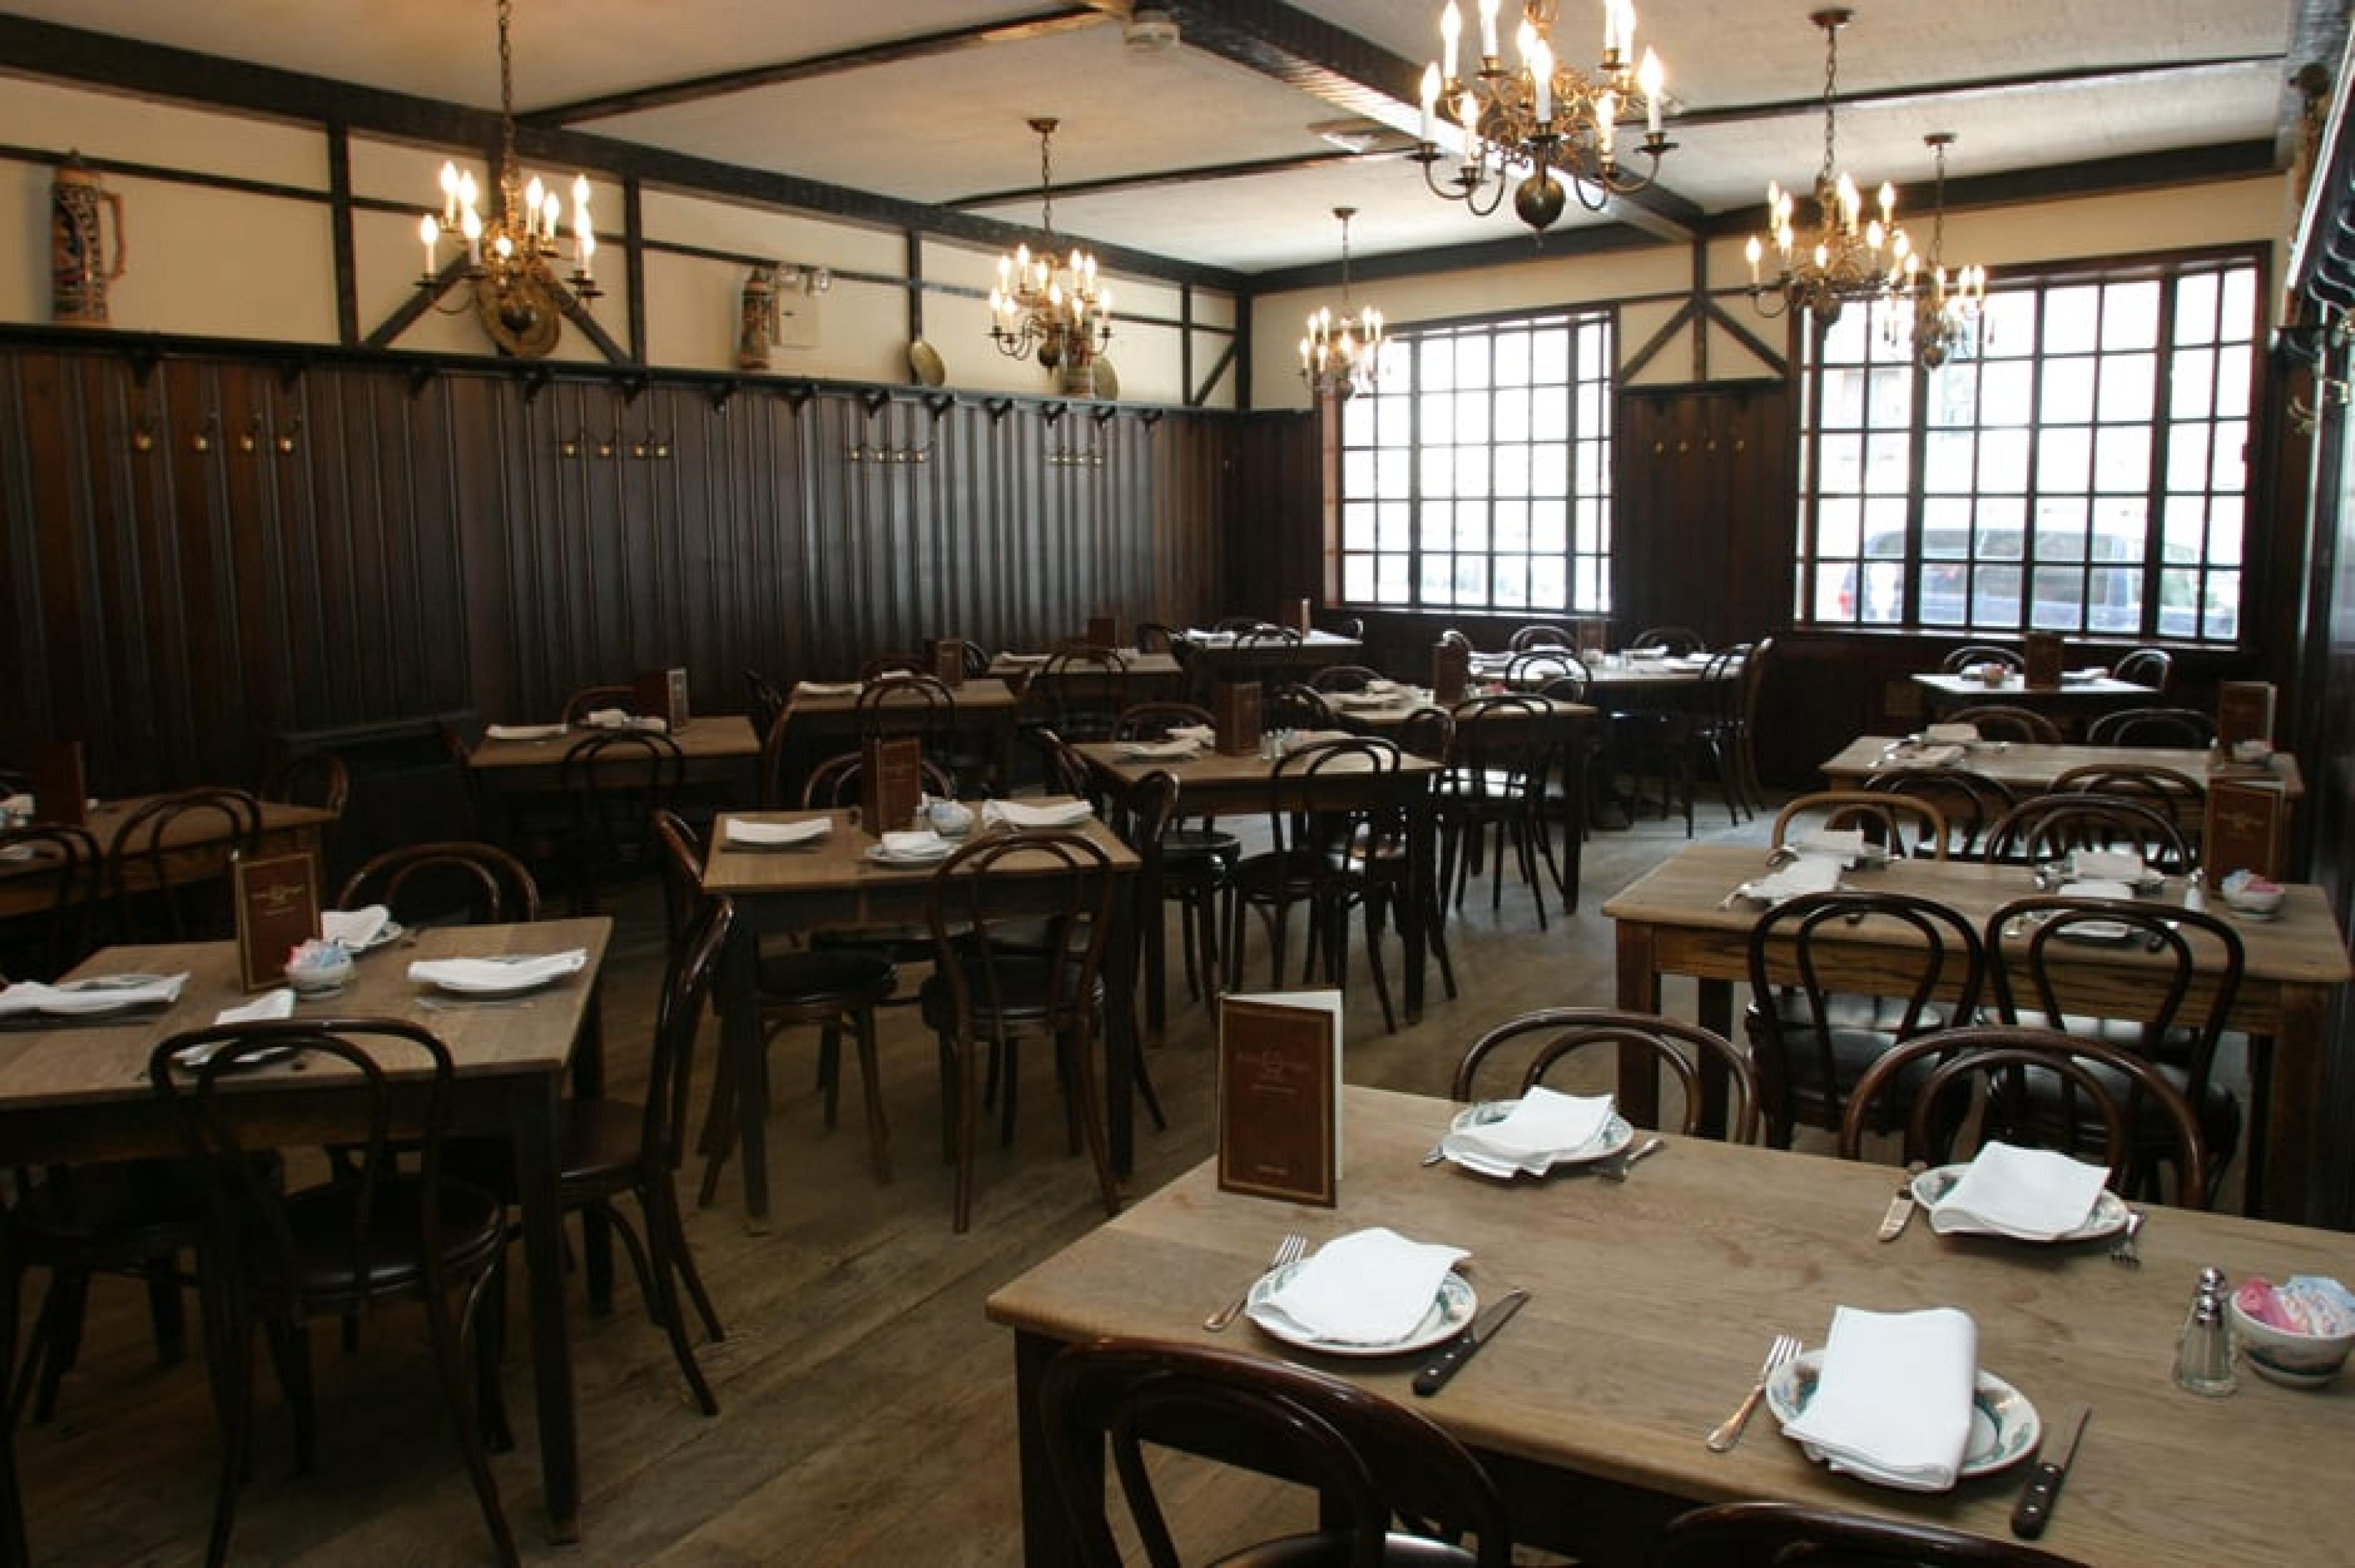 Interiors at Peter Luger Steak House, Brooklyn, New York